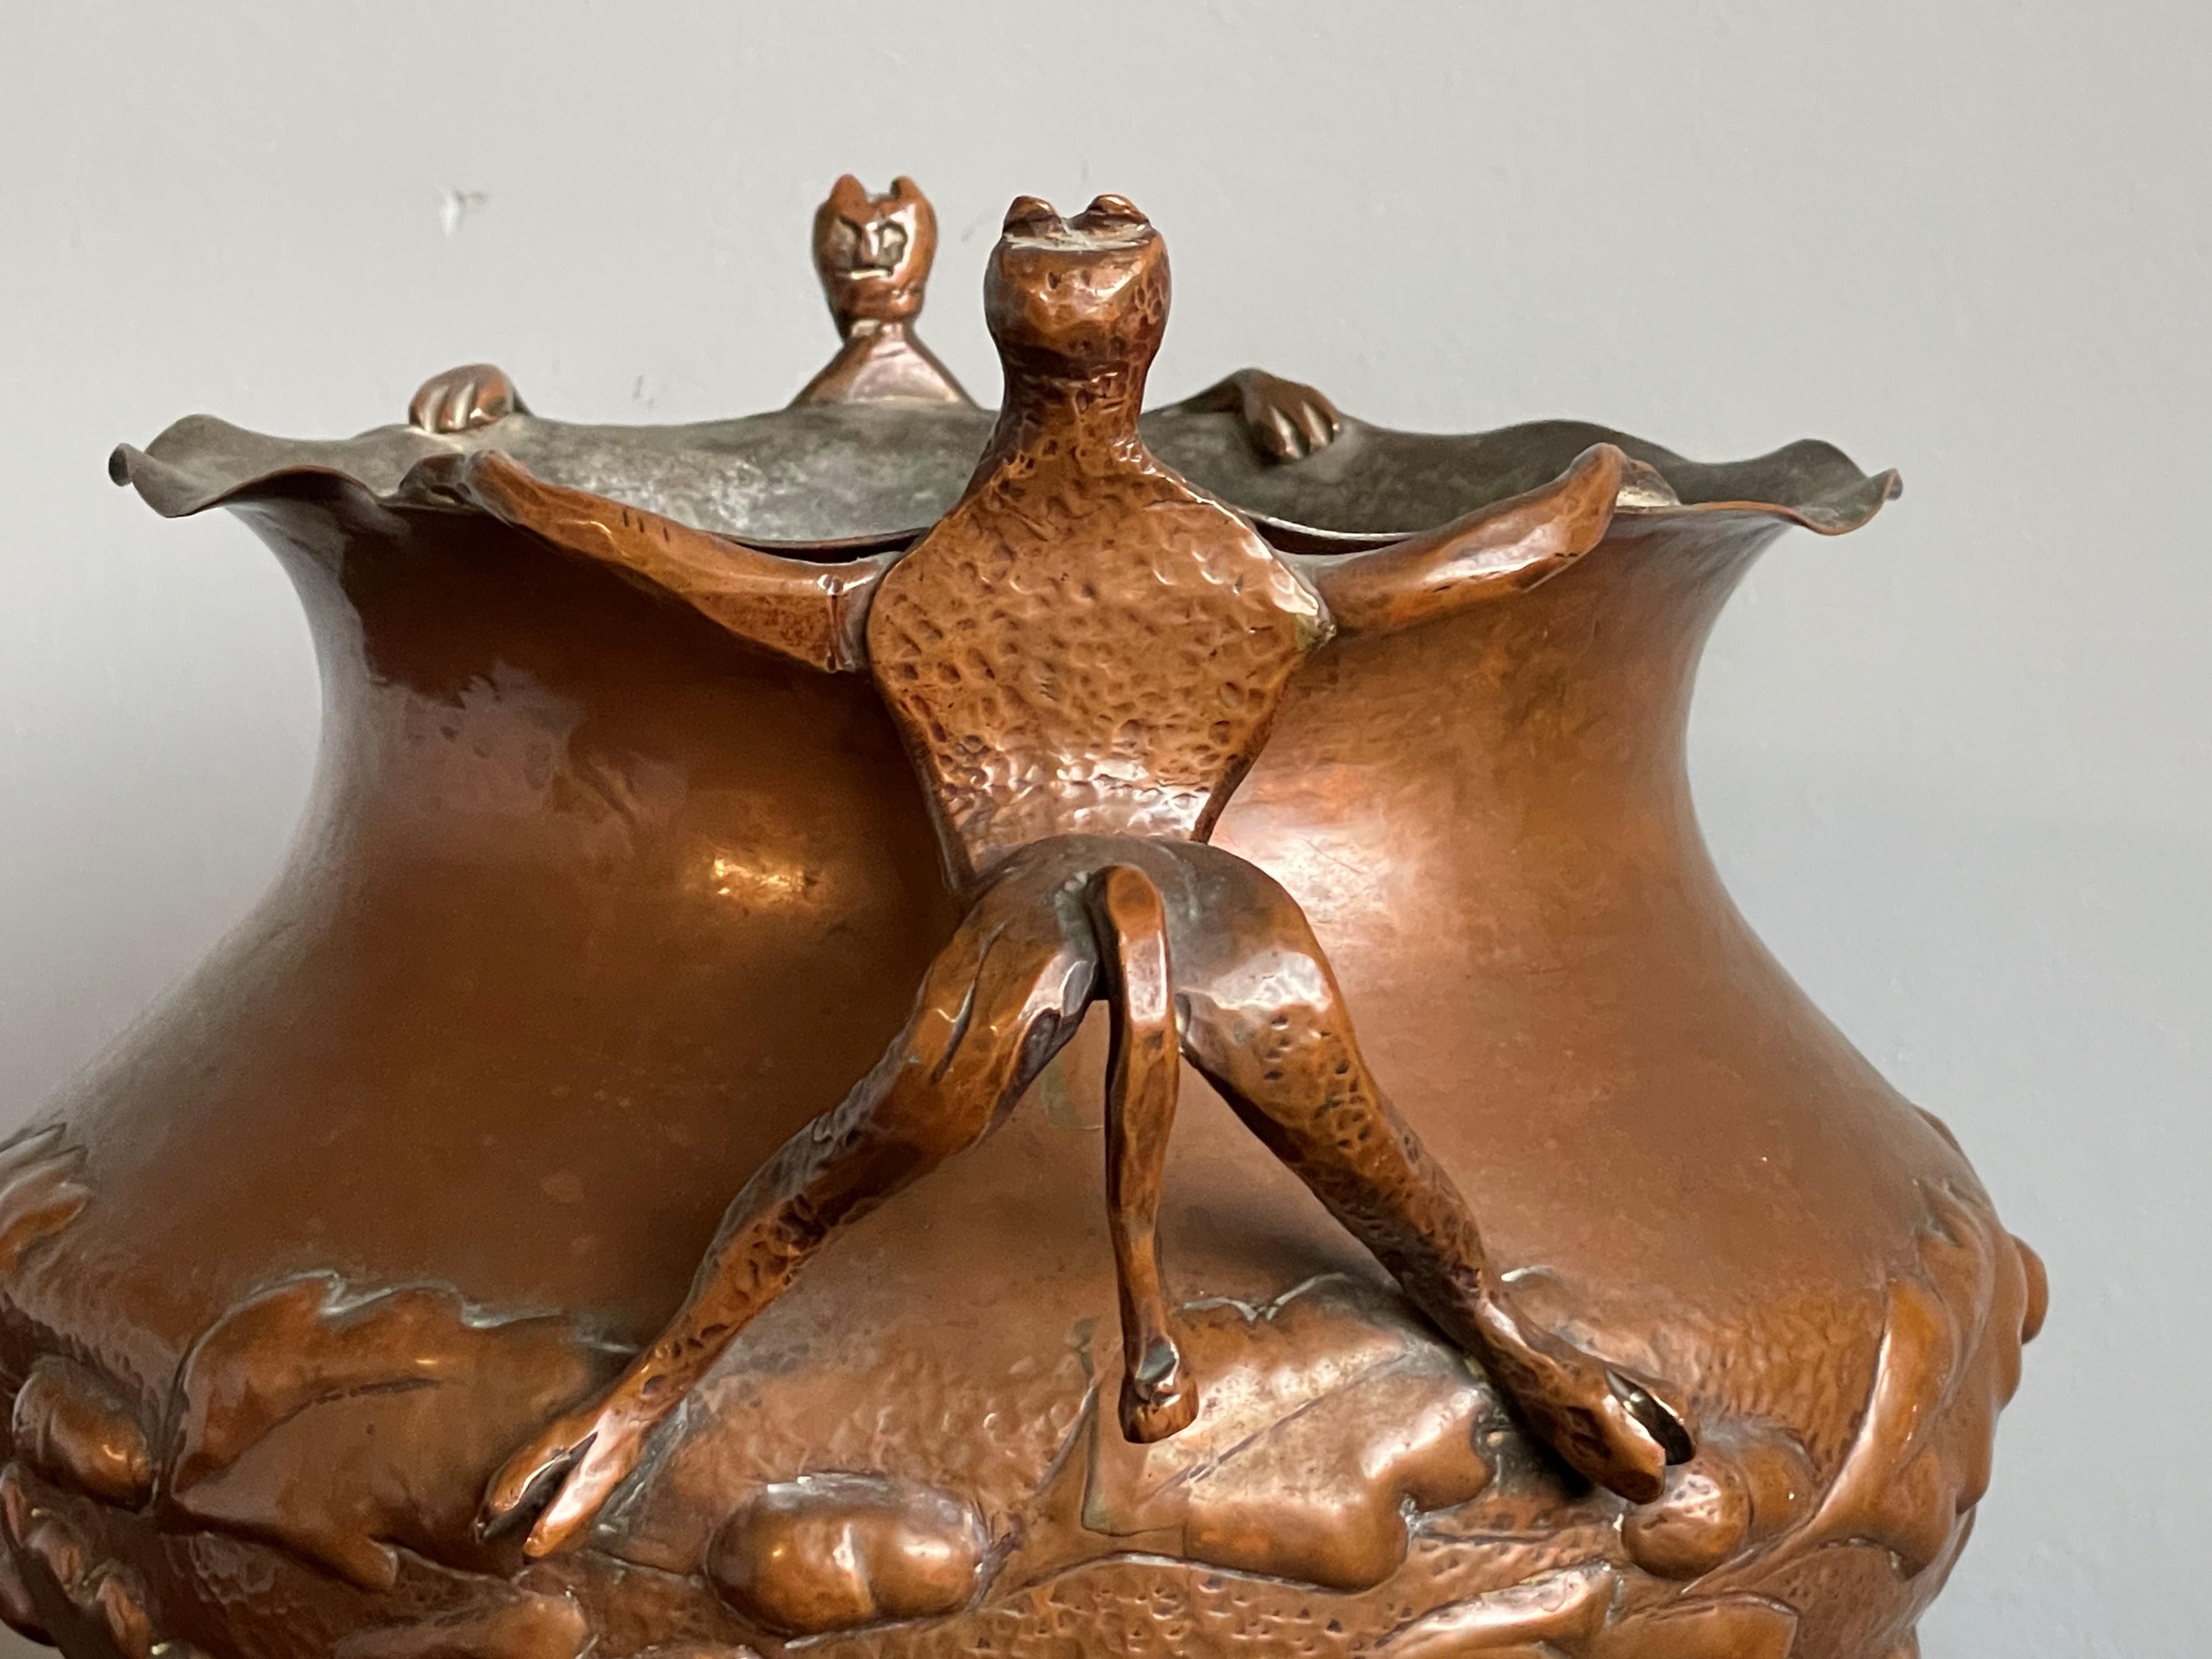 Early Victorian Unique Mid 1800s Embossed Copper Planter / Vase with Satyr Sculptures as Handles For Sale